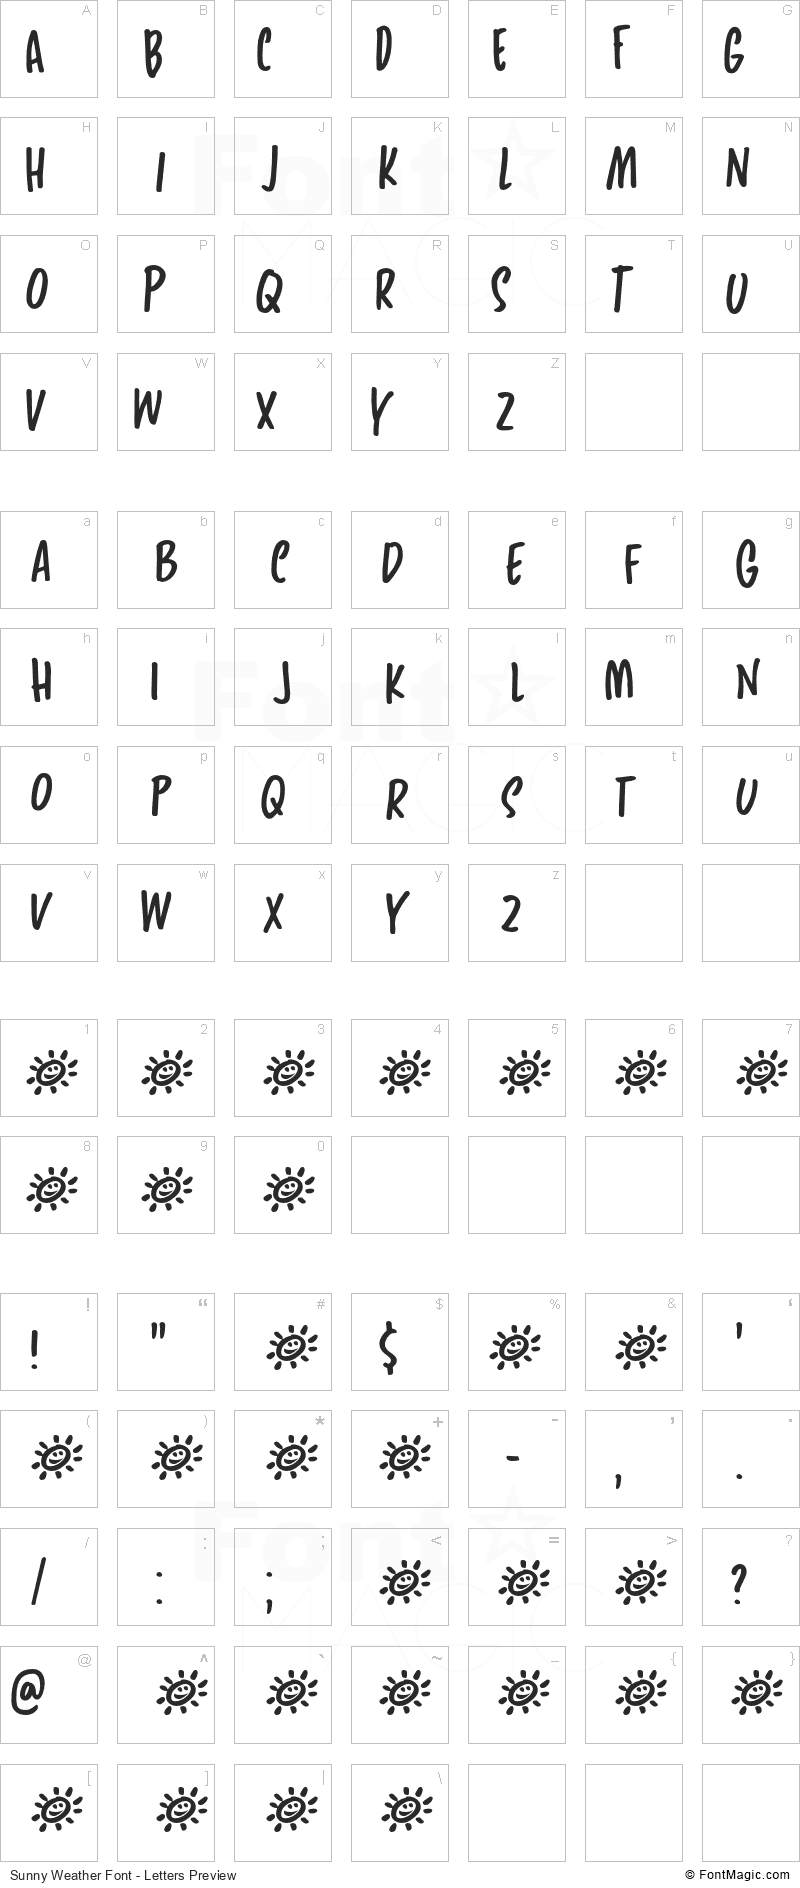 Sunny Weather Font - All Latters Preview Chart